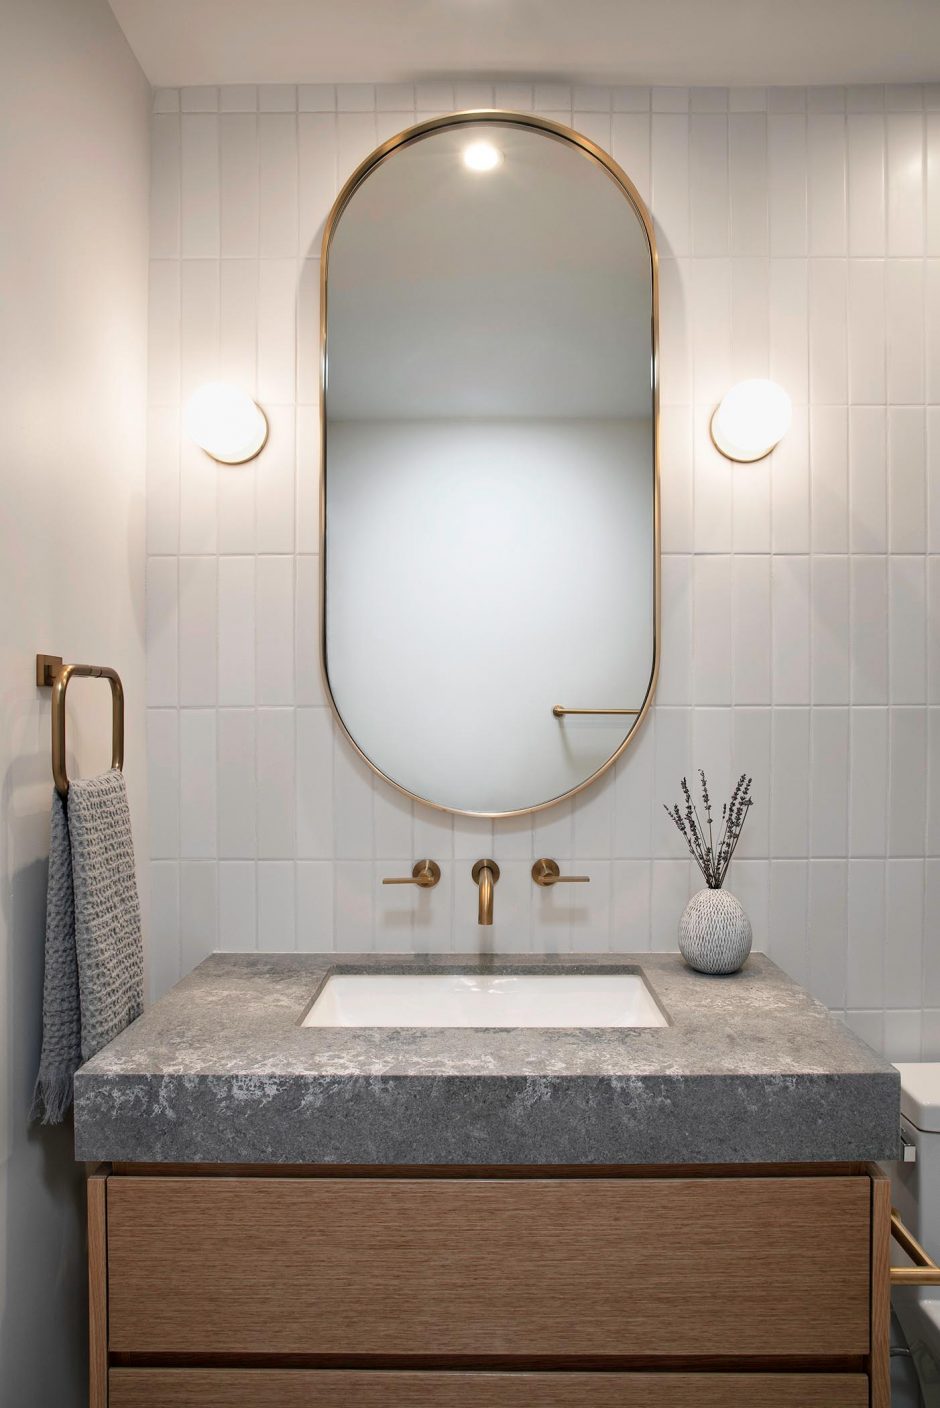 Two Bathrooms In The Same Home That Each Have A Distinct Style